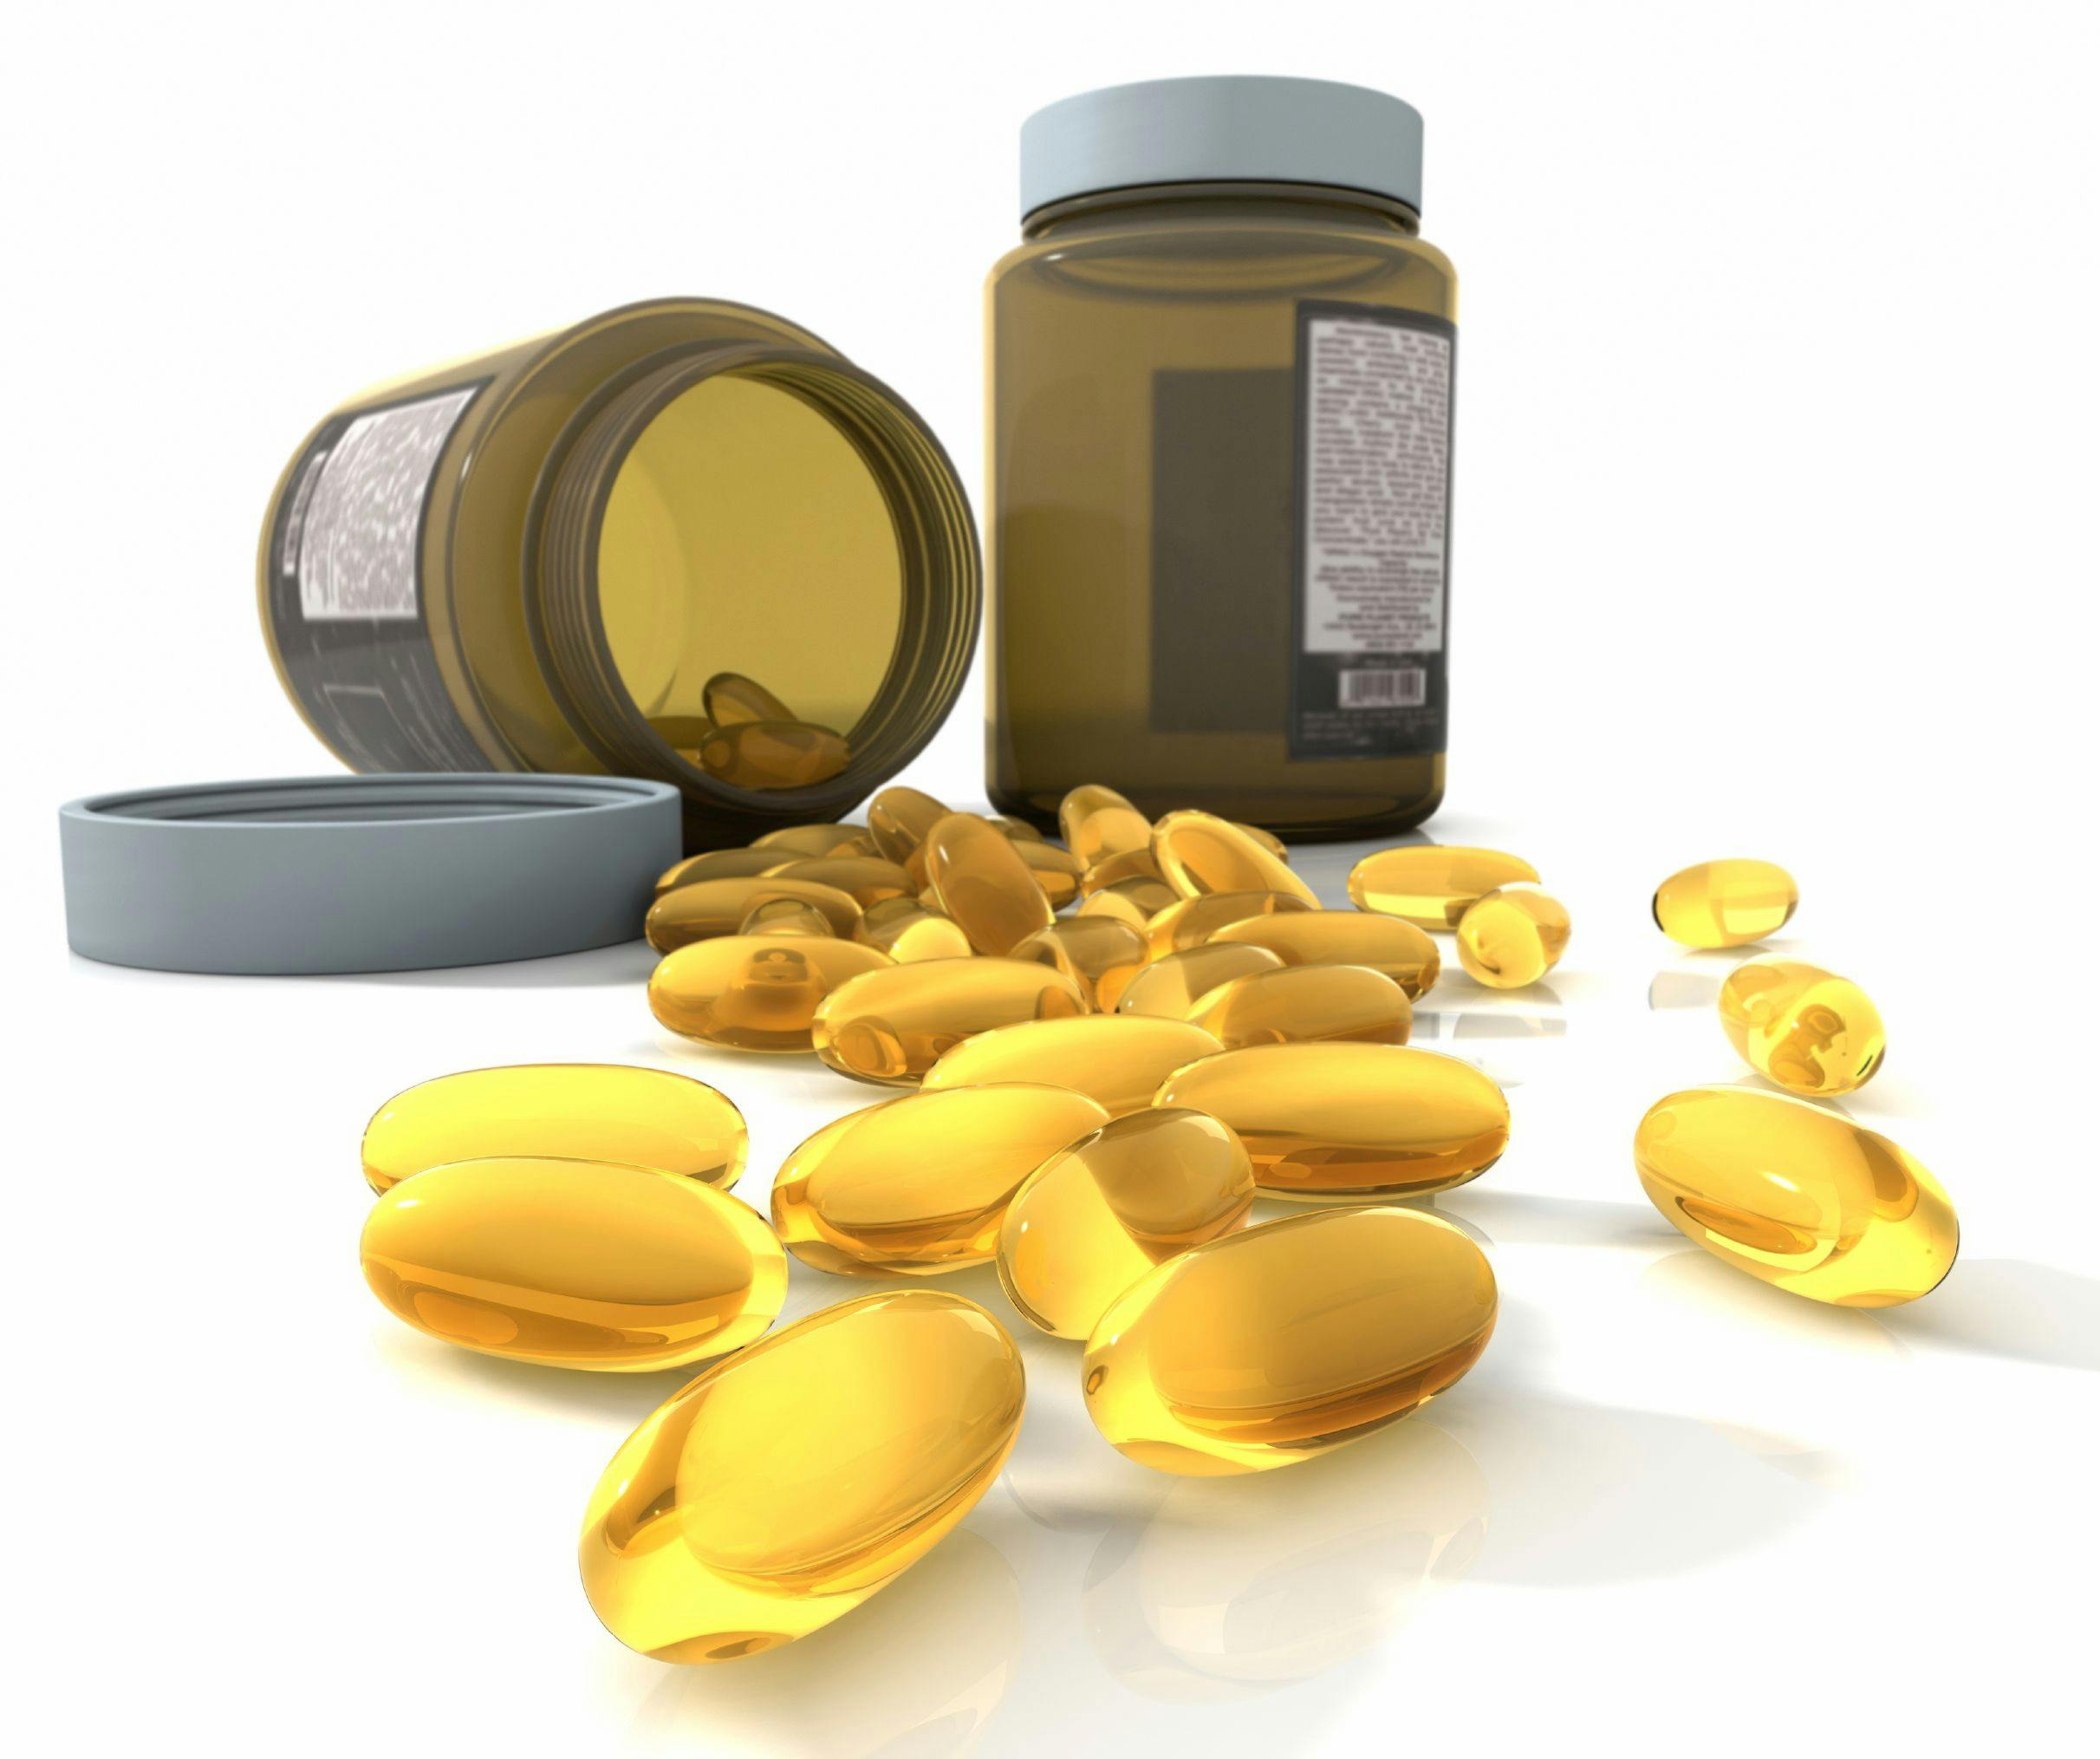 Combination of Fish Oil and Metformin Could Help Alleviate Burden of Dyslipidemia in Young Women with Polycystic Ovary Syndrome